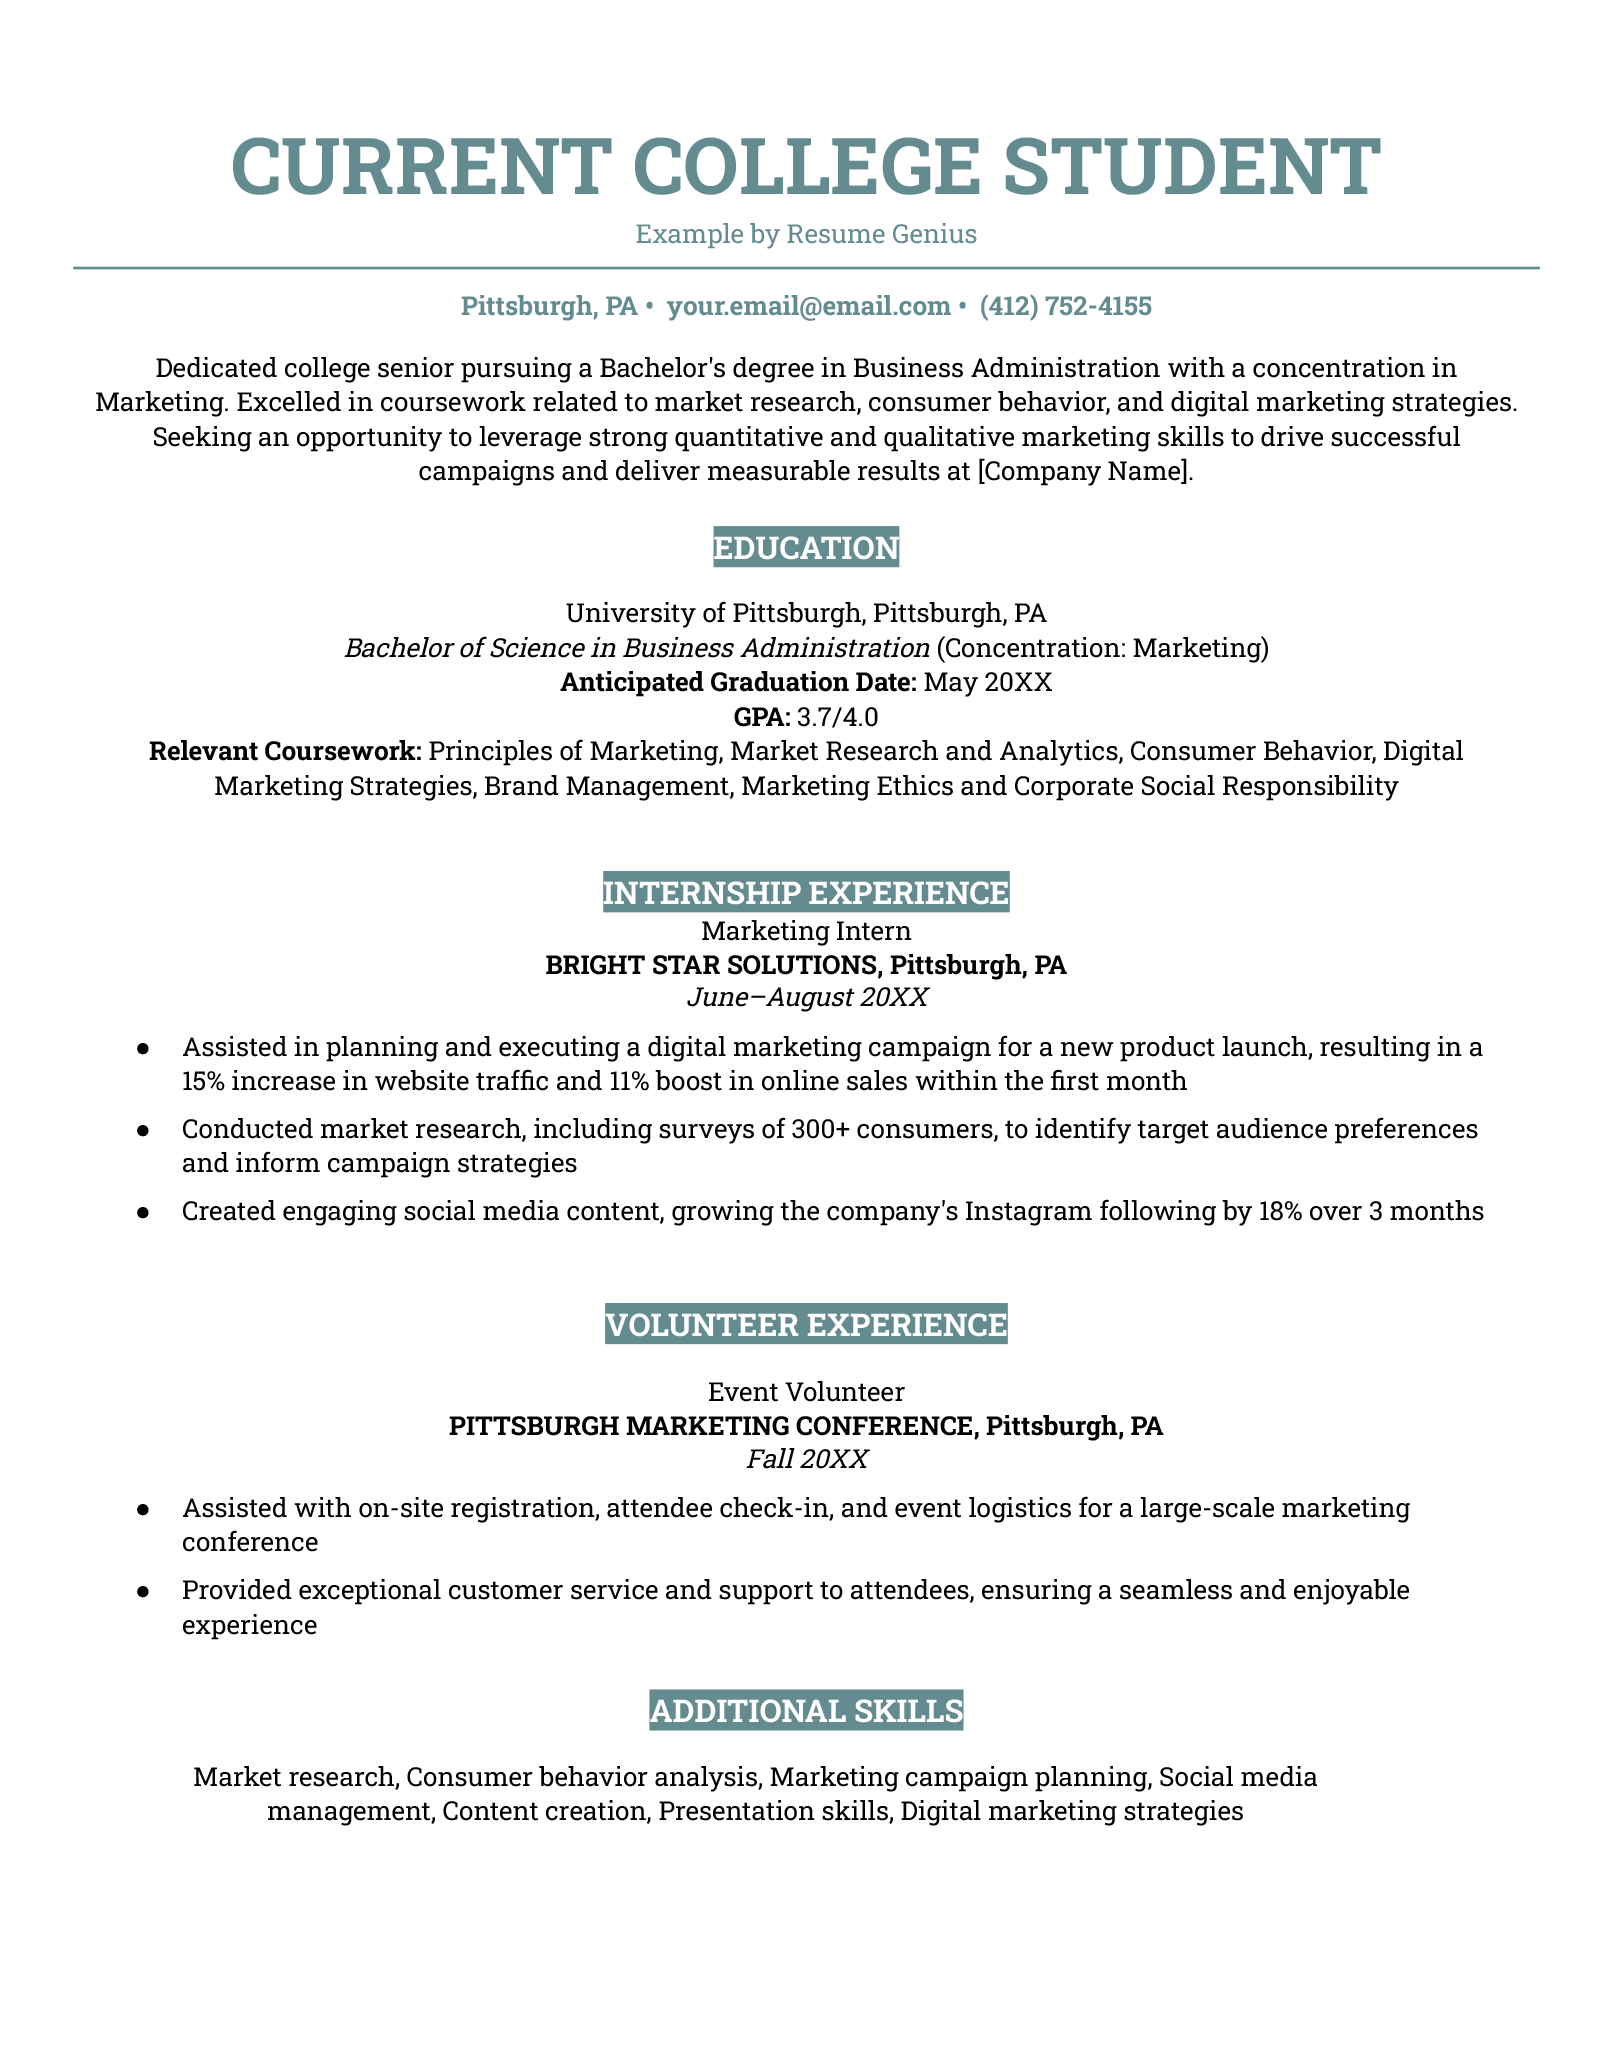 An example resume for a current college student. 